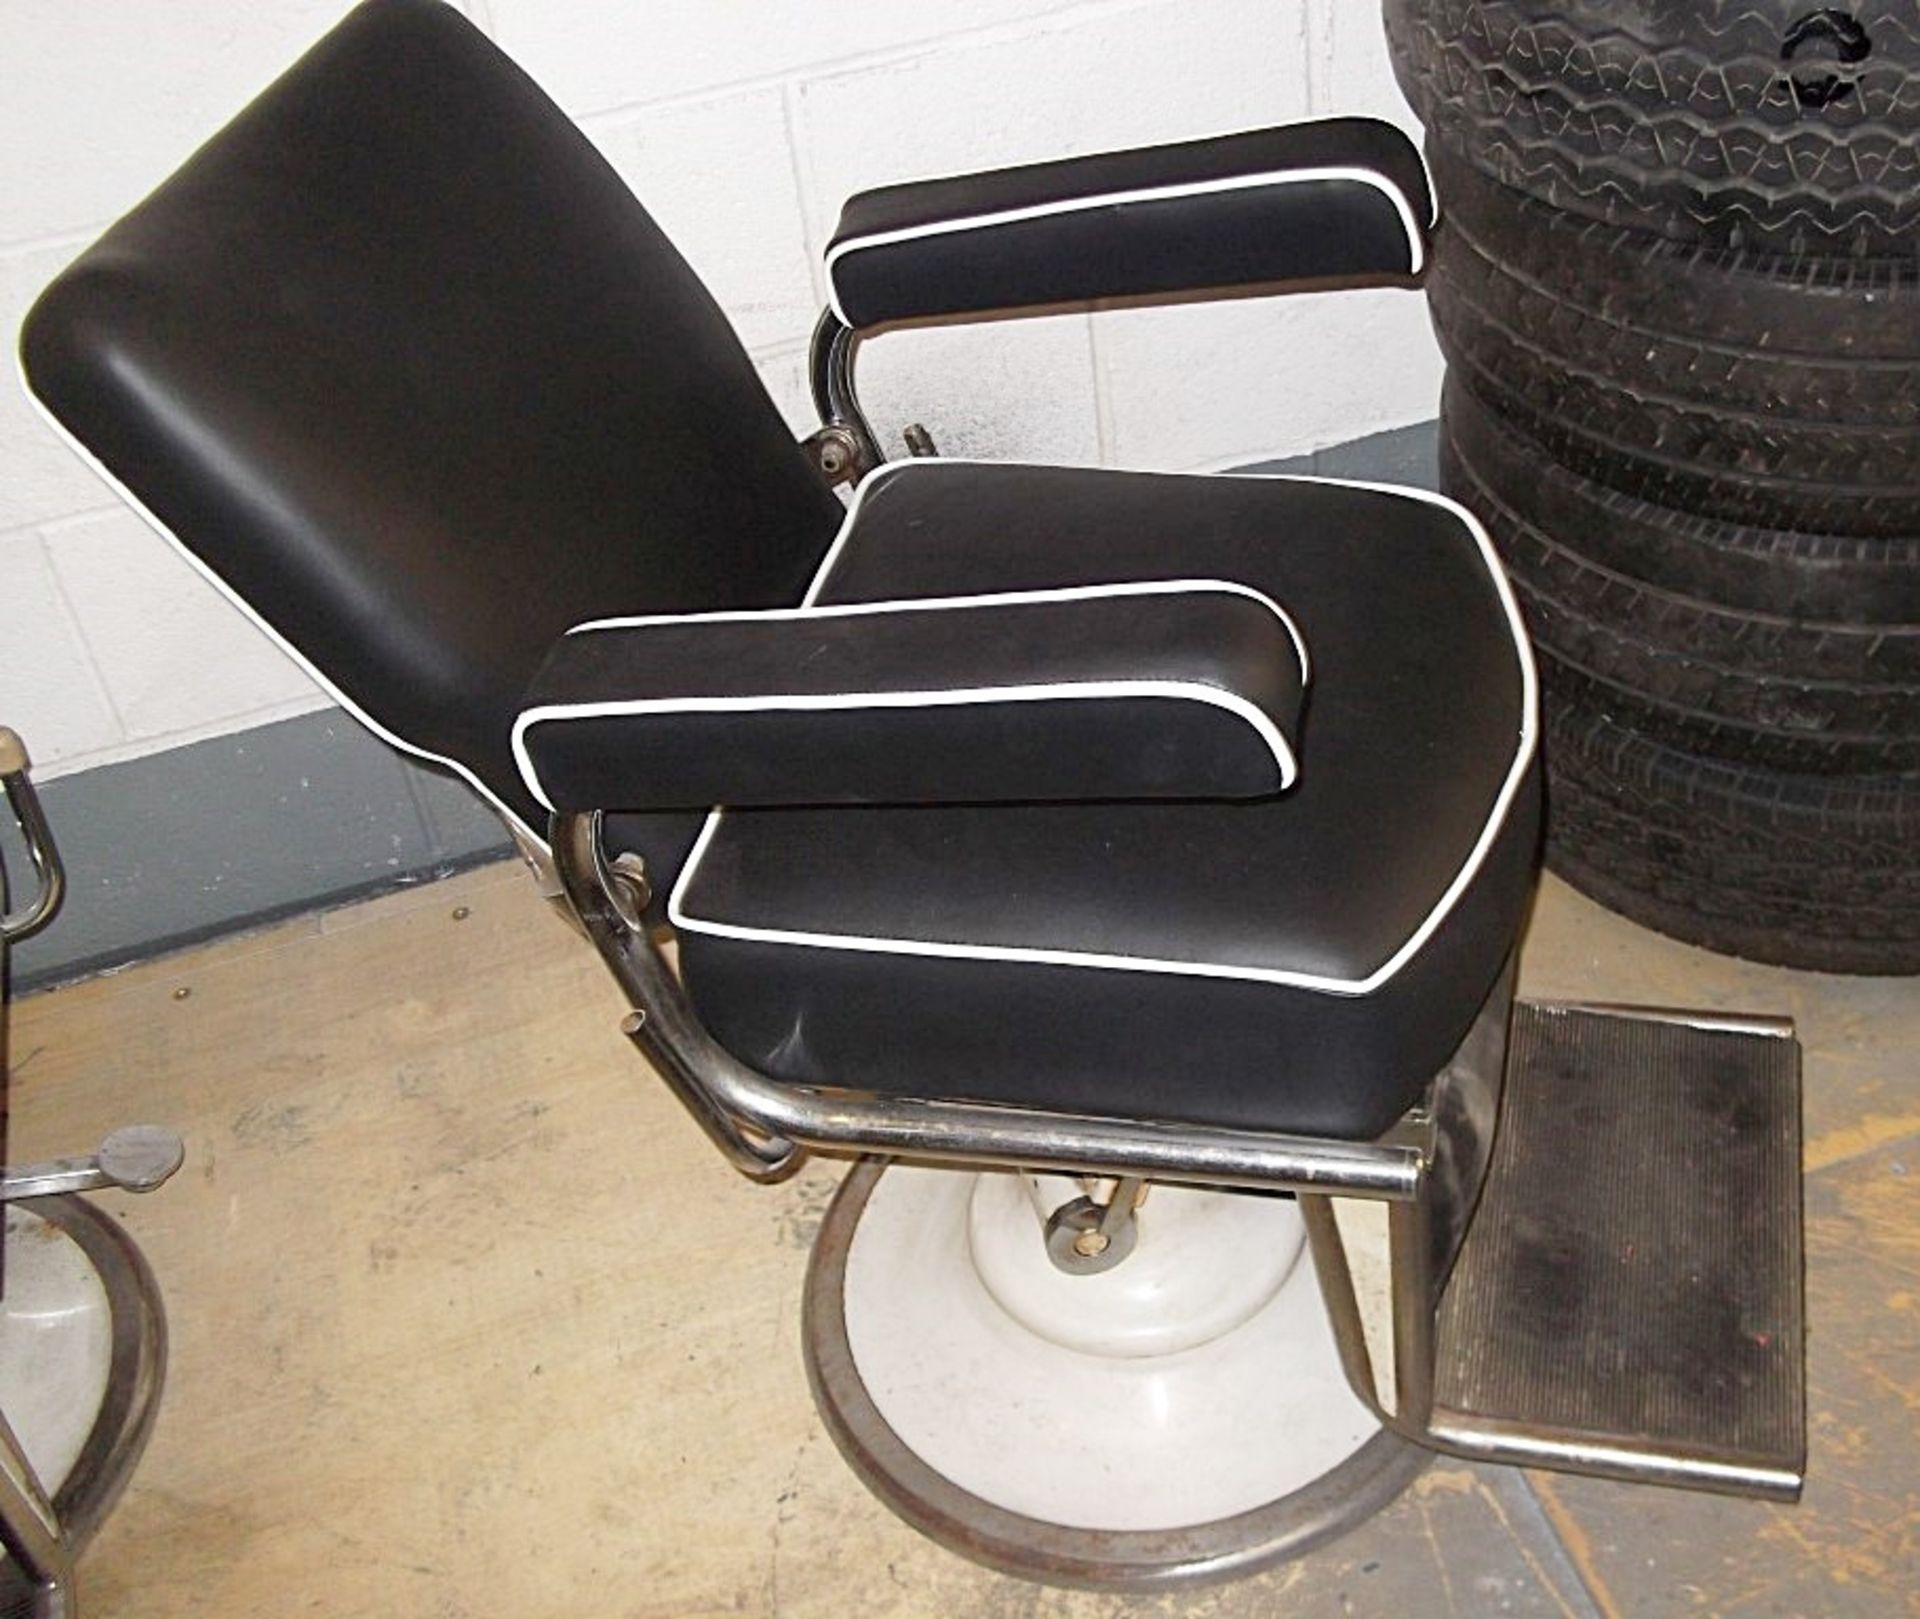 1 x Antique / Retro Barbers Chair - Partly Restored and Reupholstered As Shown - W58 x H8 x D100cm - - Image 4 of 6